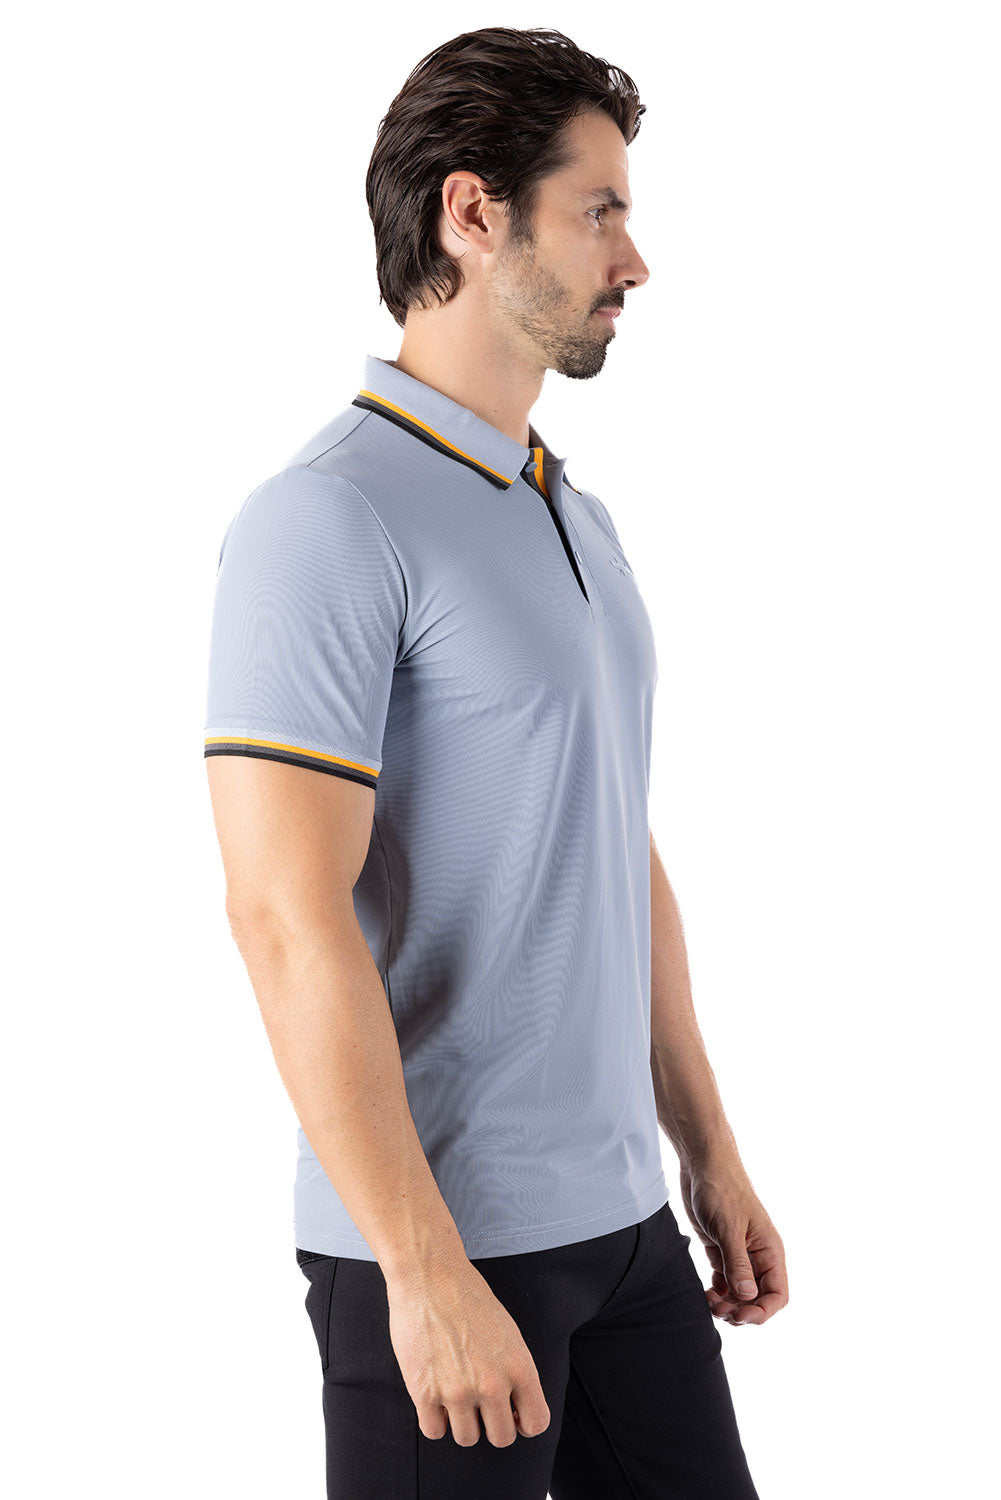 Barabas Men's Solid Color Linear Collar and Cuff Polo Shirts 3PS127 Light Grey